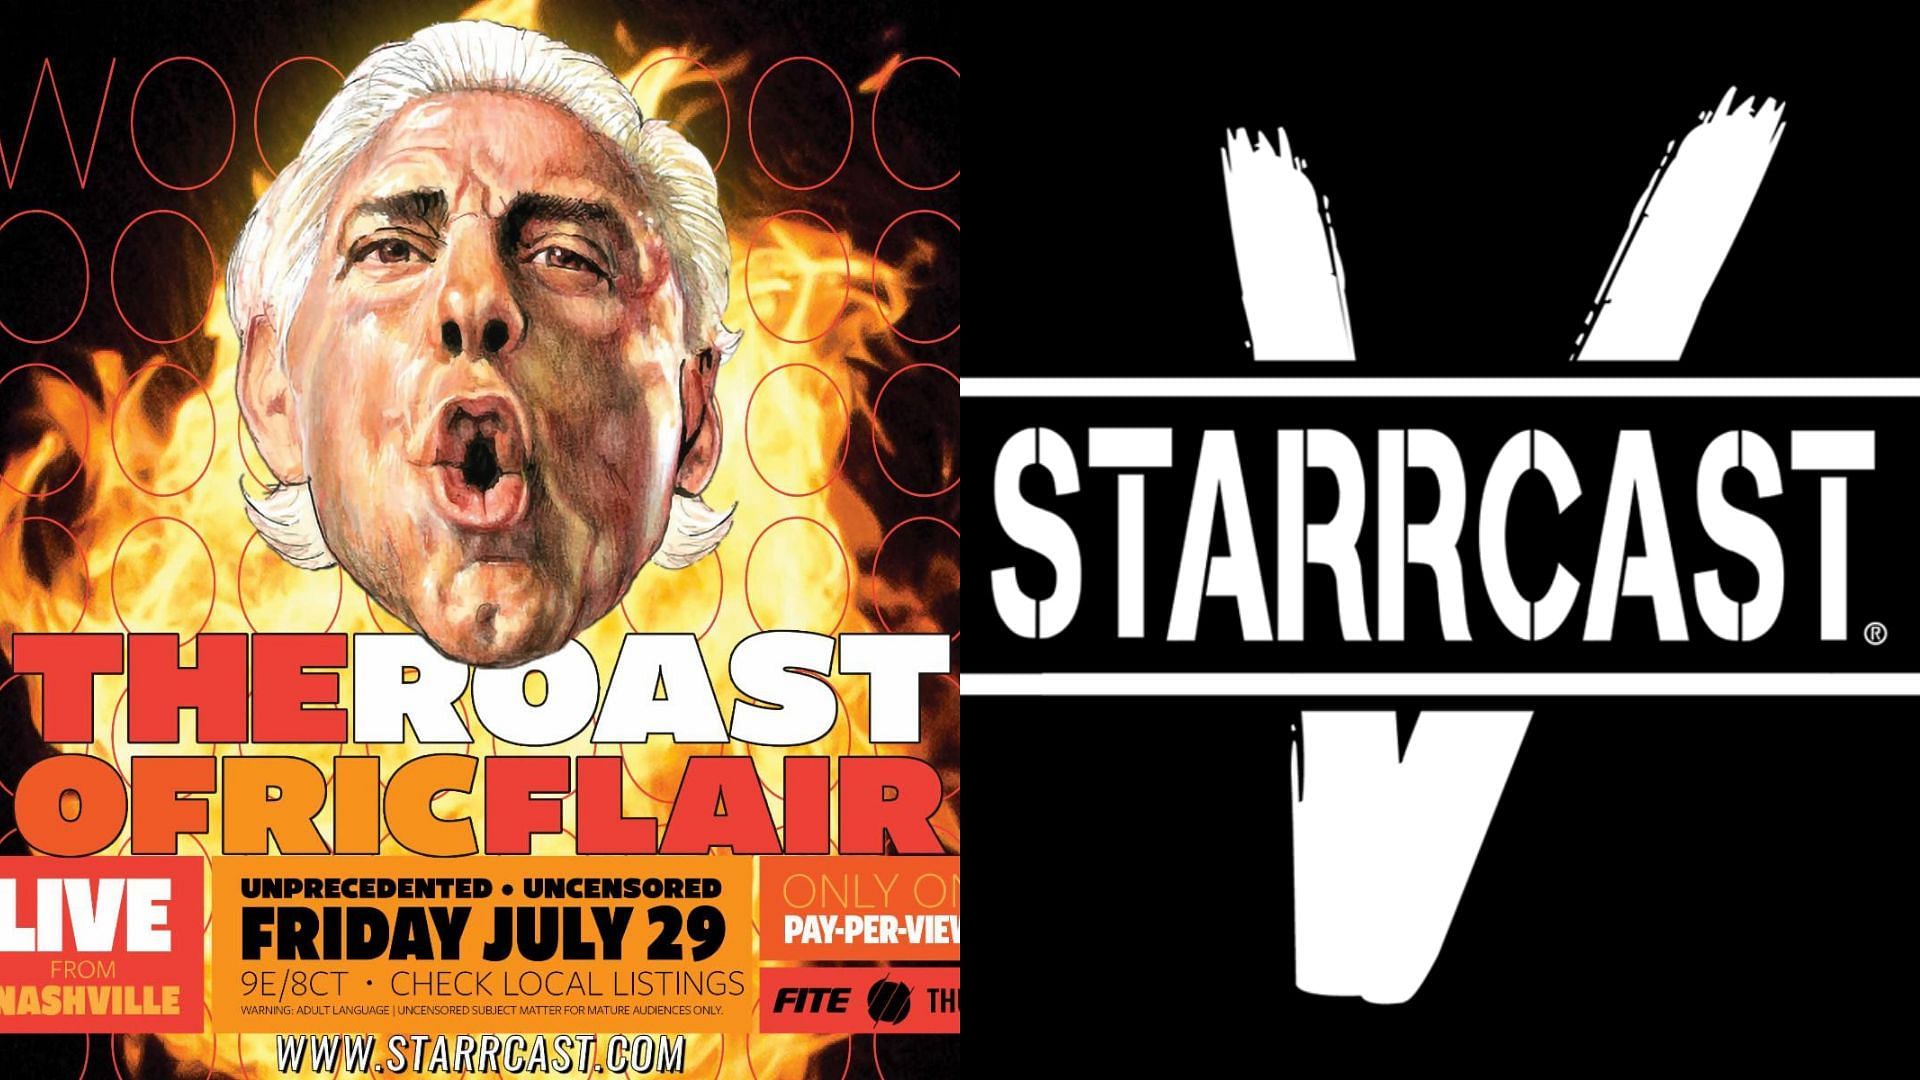 The Roast of Ric Flair promises to be quite the spectacle!